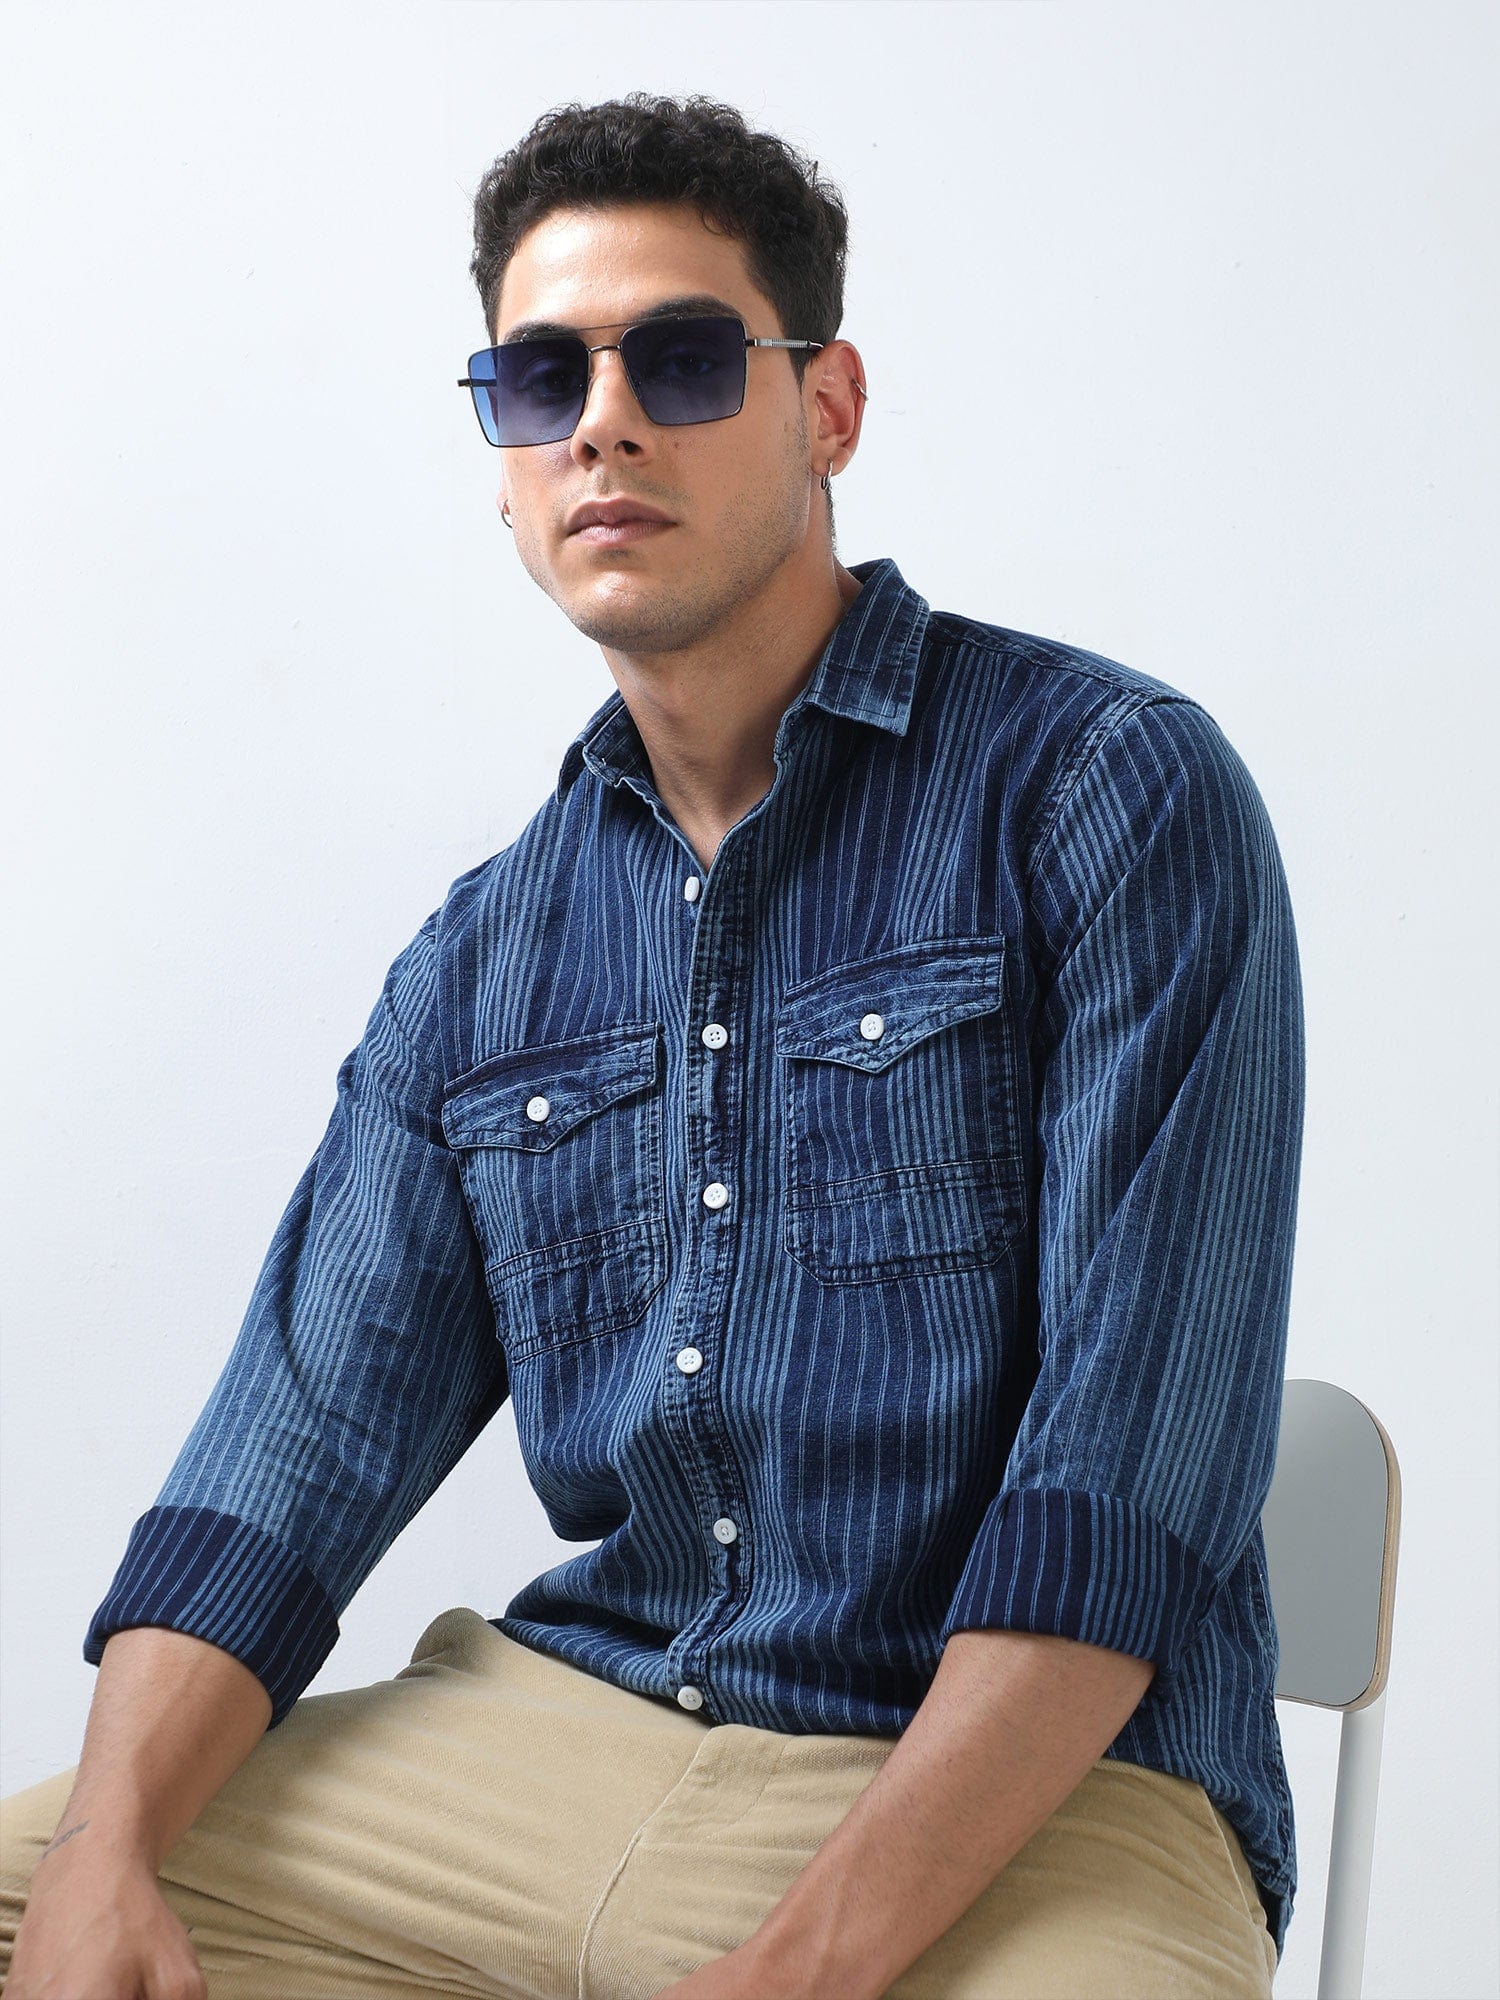 Buy Latest Twilighr Blue Striped Shirt Online In IndiaRs. 1549.00